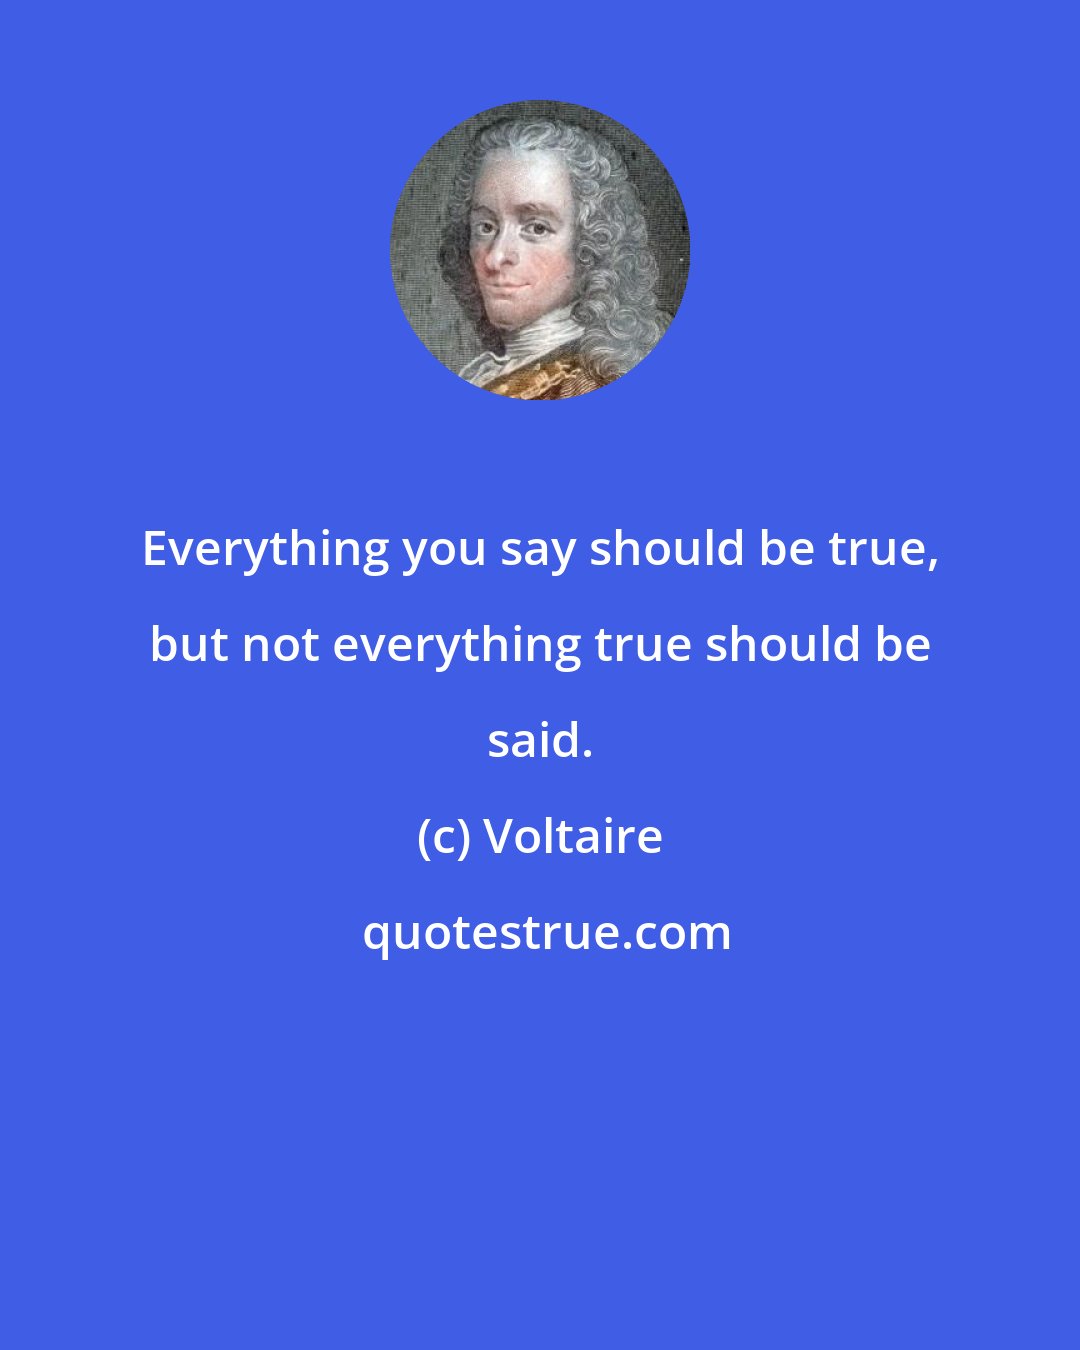 Voltaire: Everything you say should be true, but not everything true should be said.